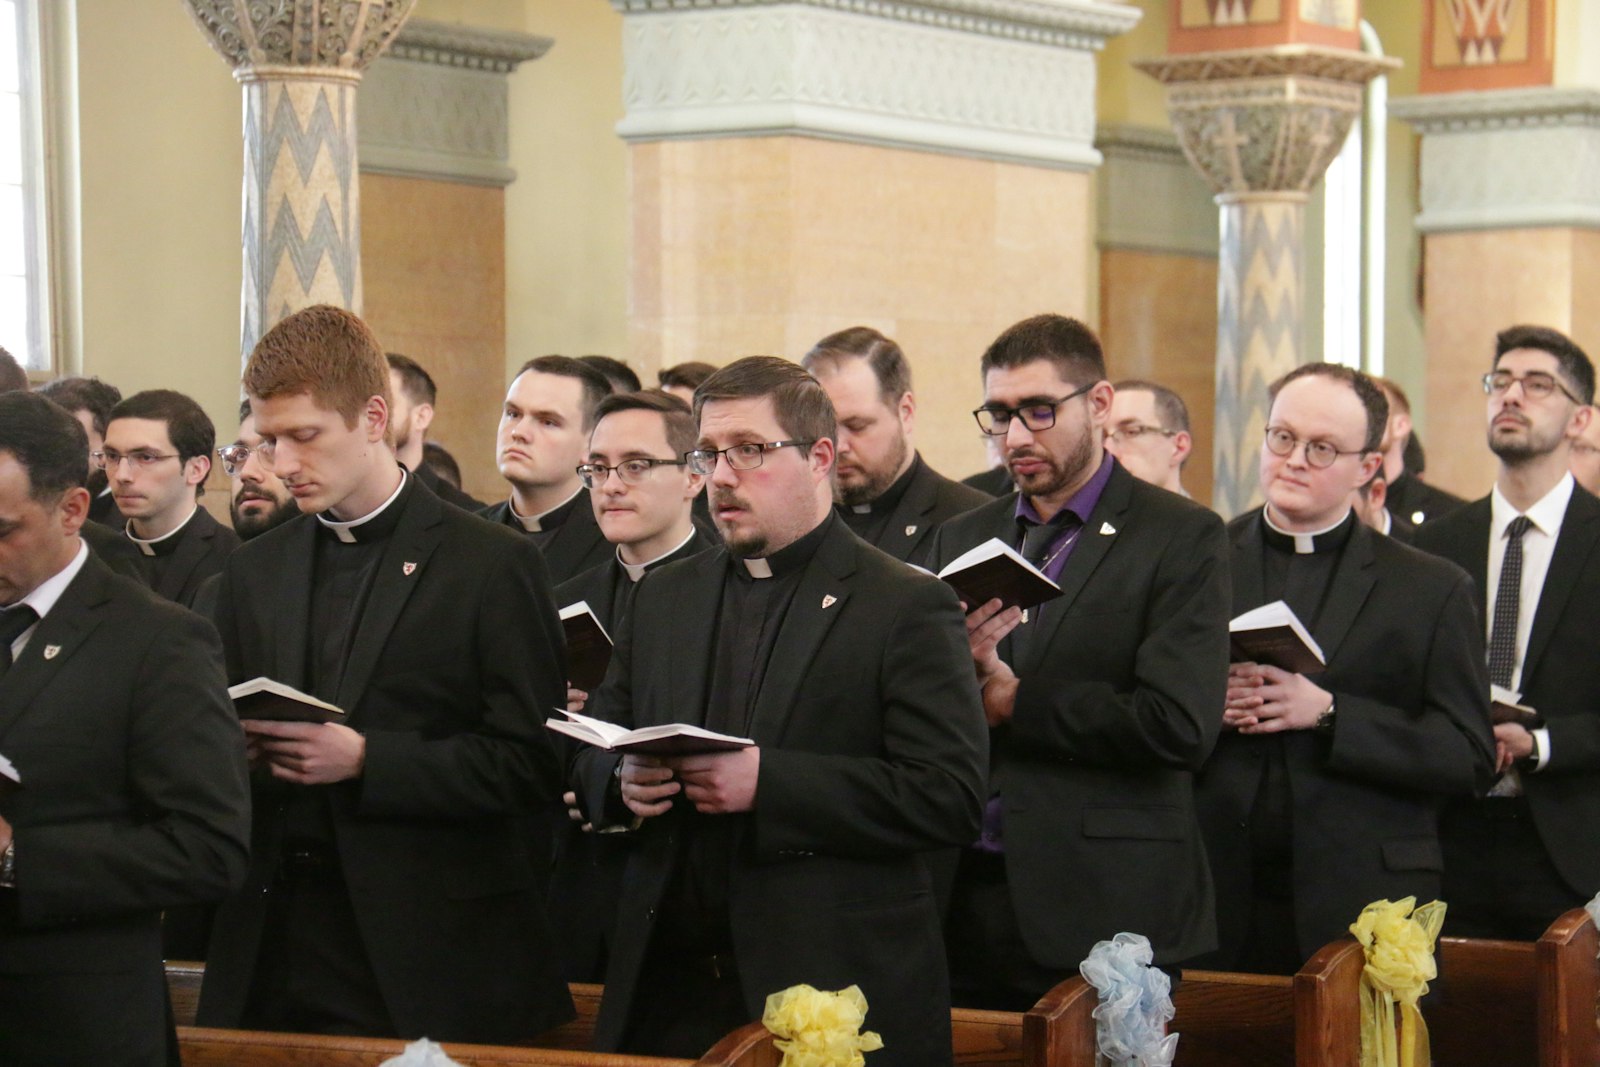 Sacred Heart Major Seminary prayed in solidarity with the Ukrainian Greek Catholic Community of Detroit during a Sunday Divine Liturgy at Immaculate Conception Ukrainian Catholic Church on Feb. 27. Fr. Burr said the seminary visited to show solidarity with the Eastern-rite church.